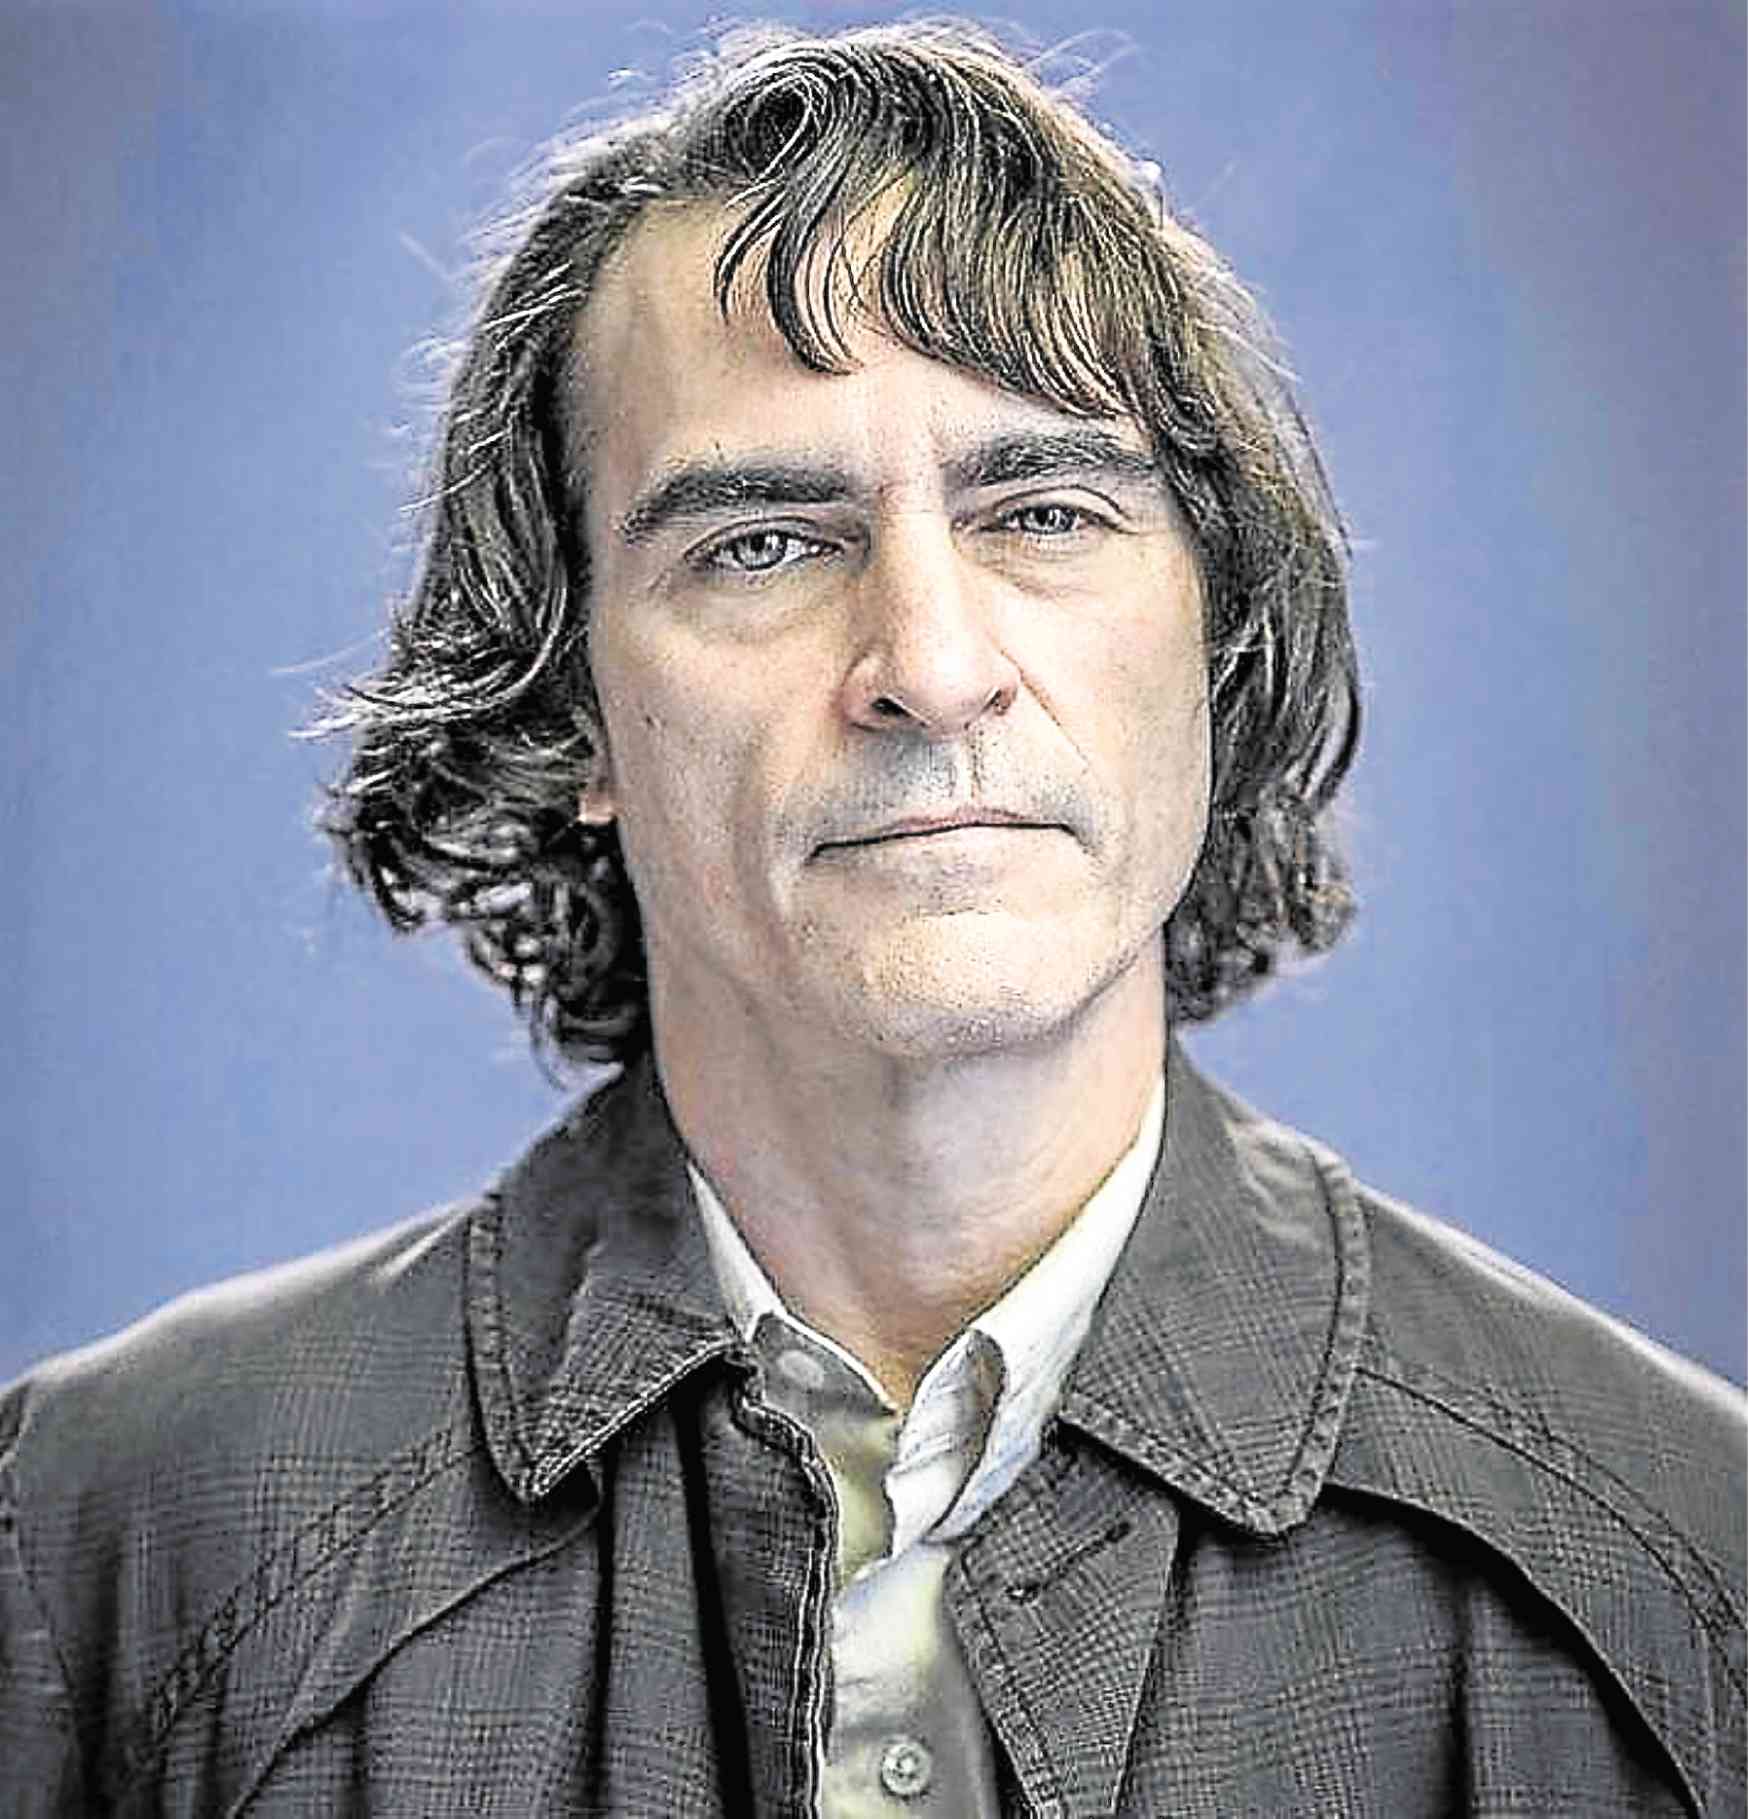 Joaquin Phoenix sheds tons of weight to play Joker | Inquirer Entertainment1748 x 1819